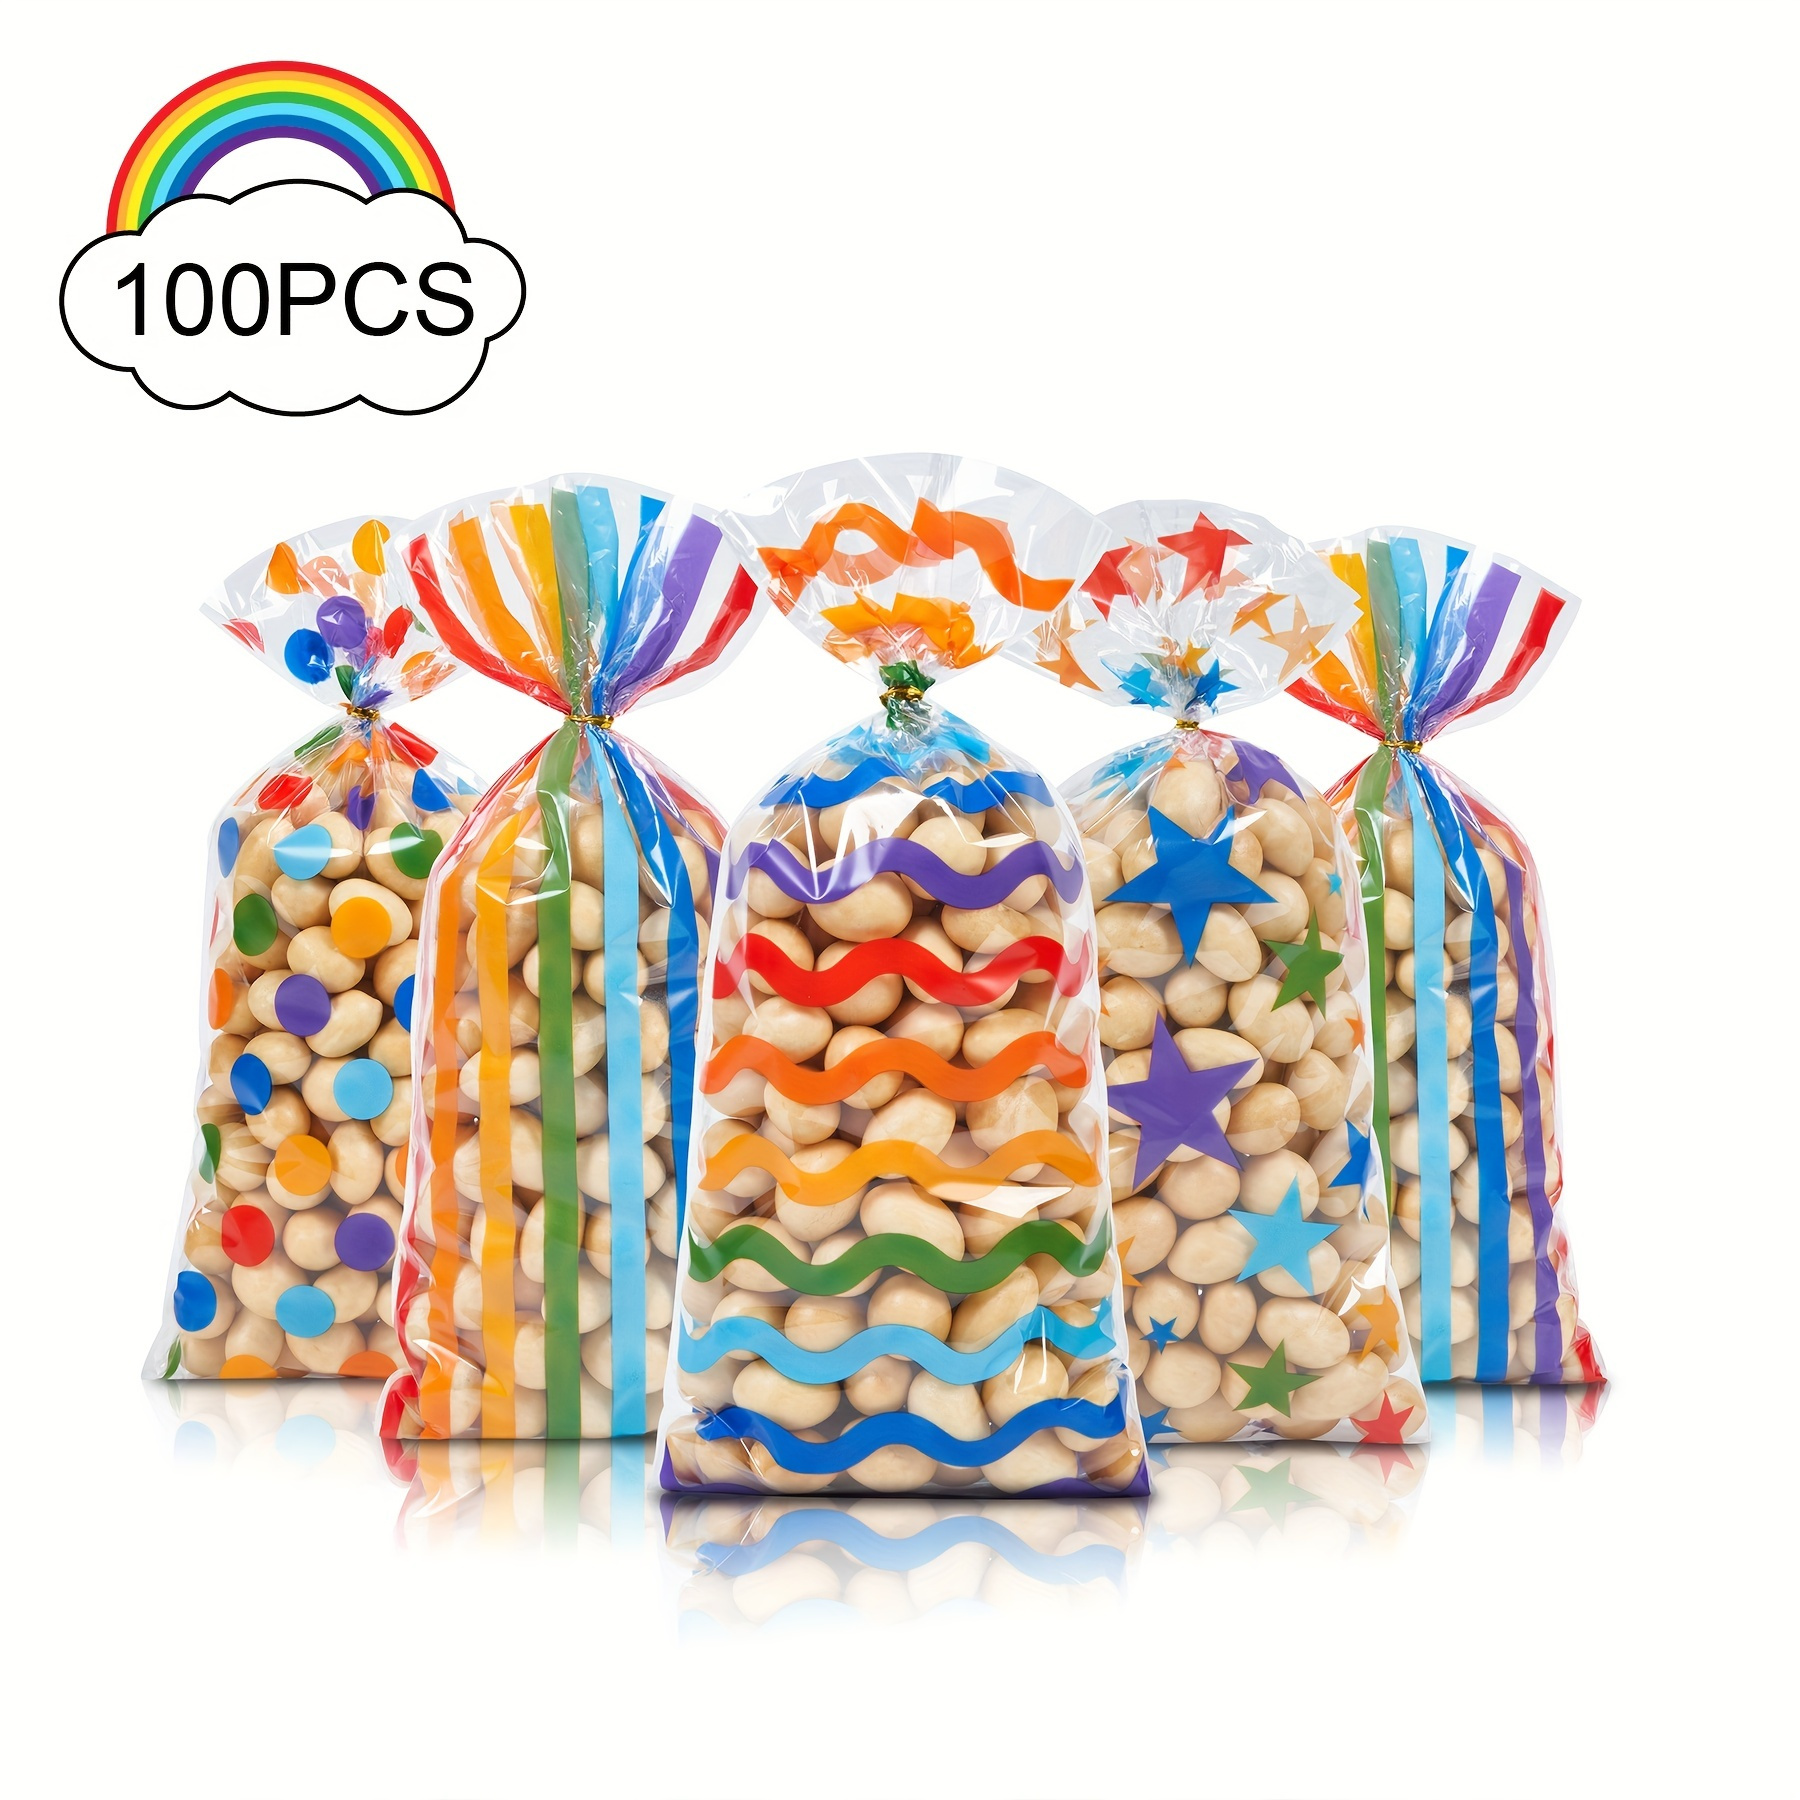 TOSPARTY Plastic Gift Bags Candy Bags Are Sturdy and Durable Party Assorted Plastic Candy Bag Gift Bag (Colorful)